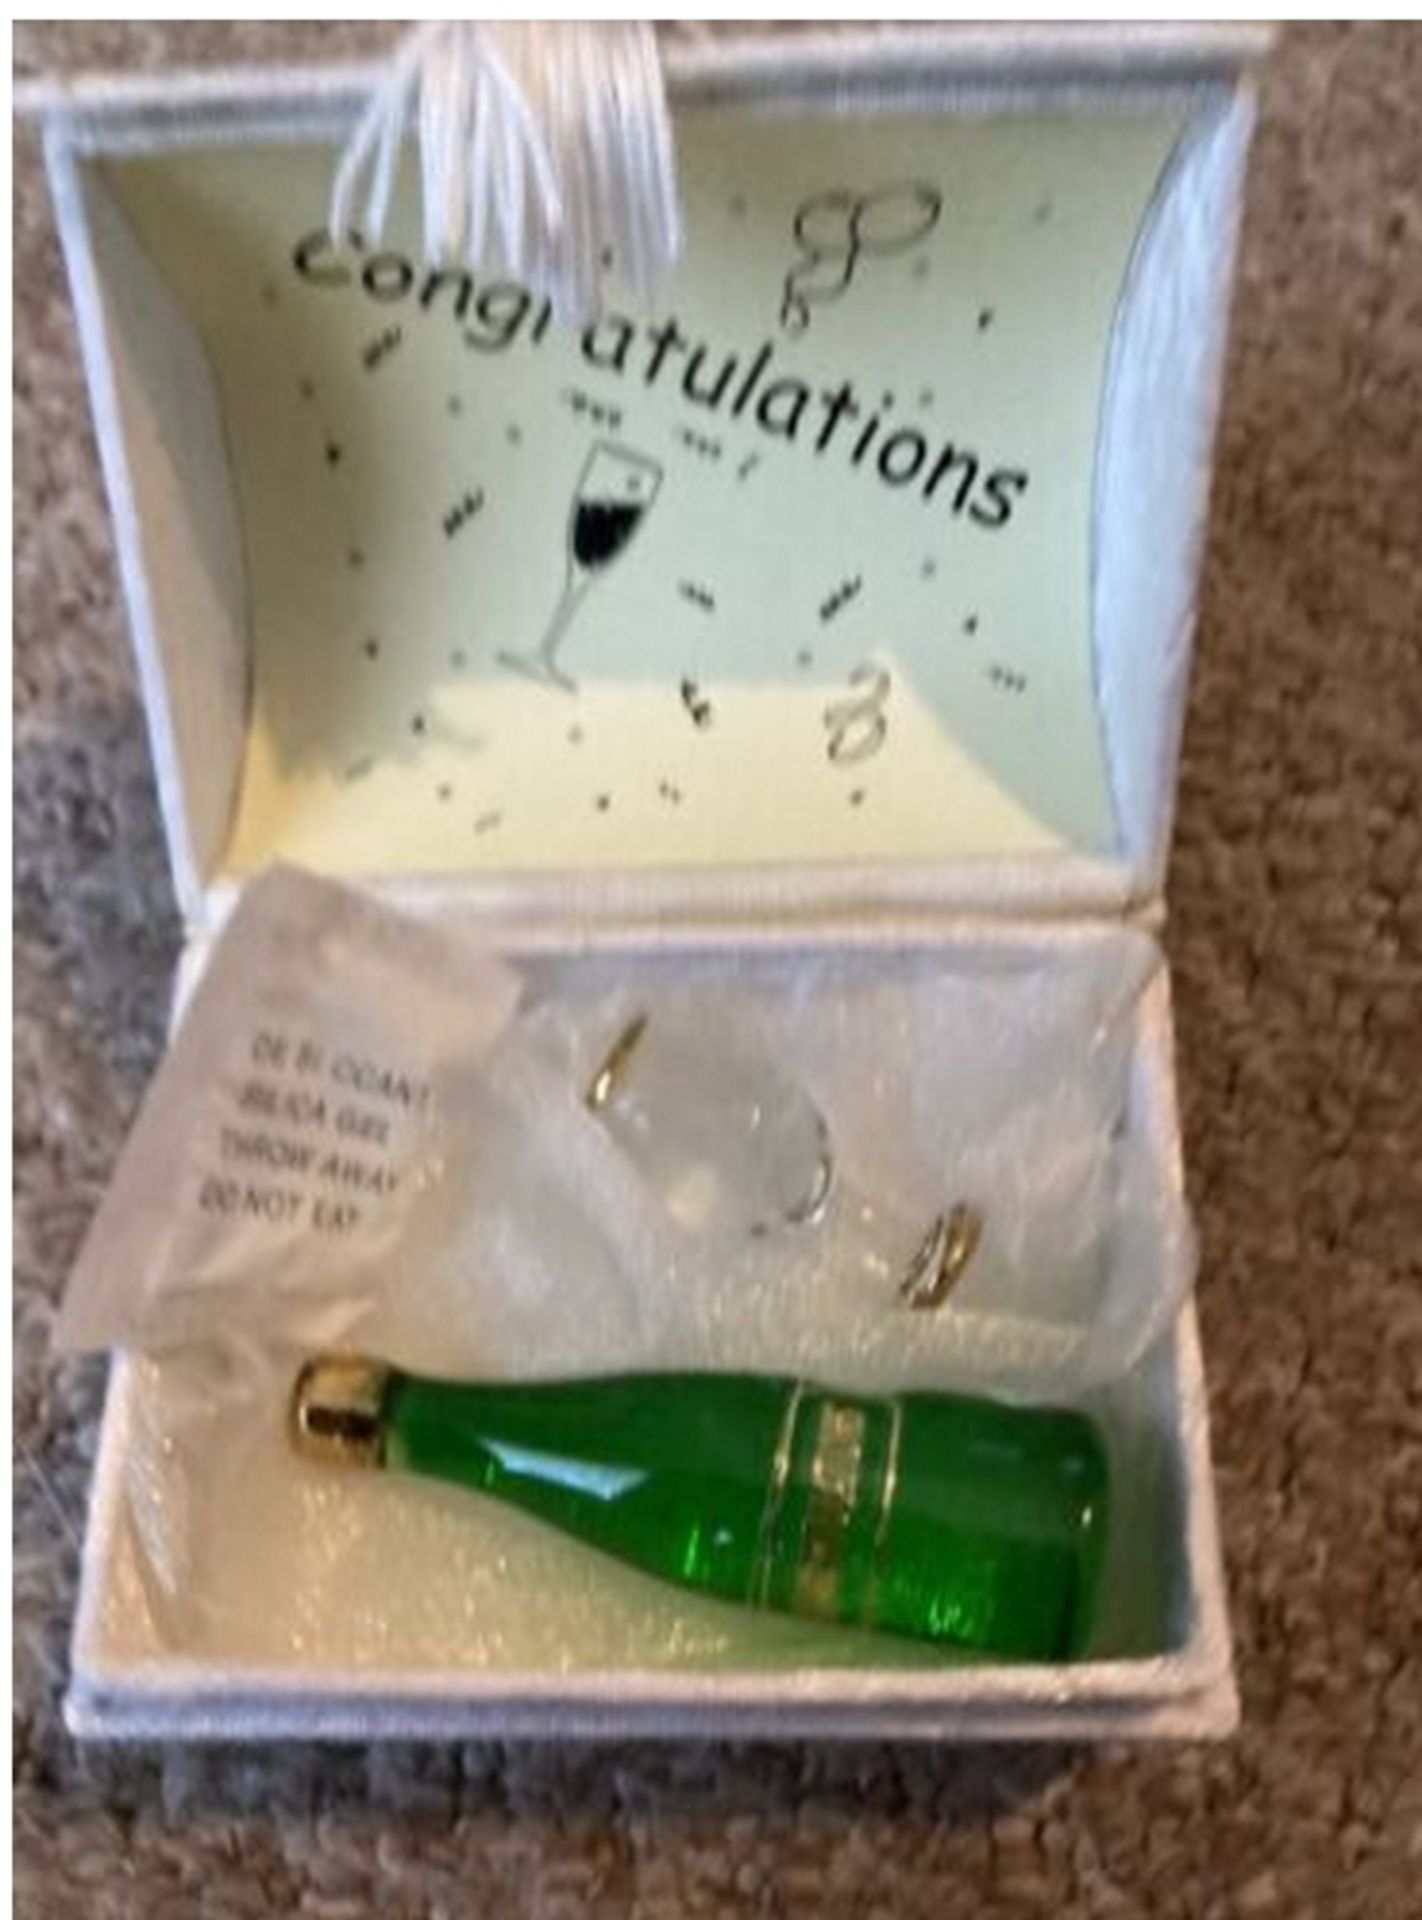 10 x congratulation box with champagne bottle and glass